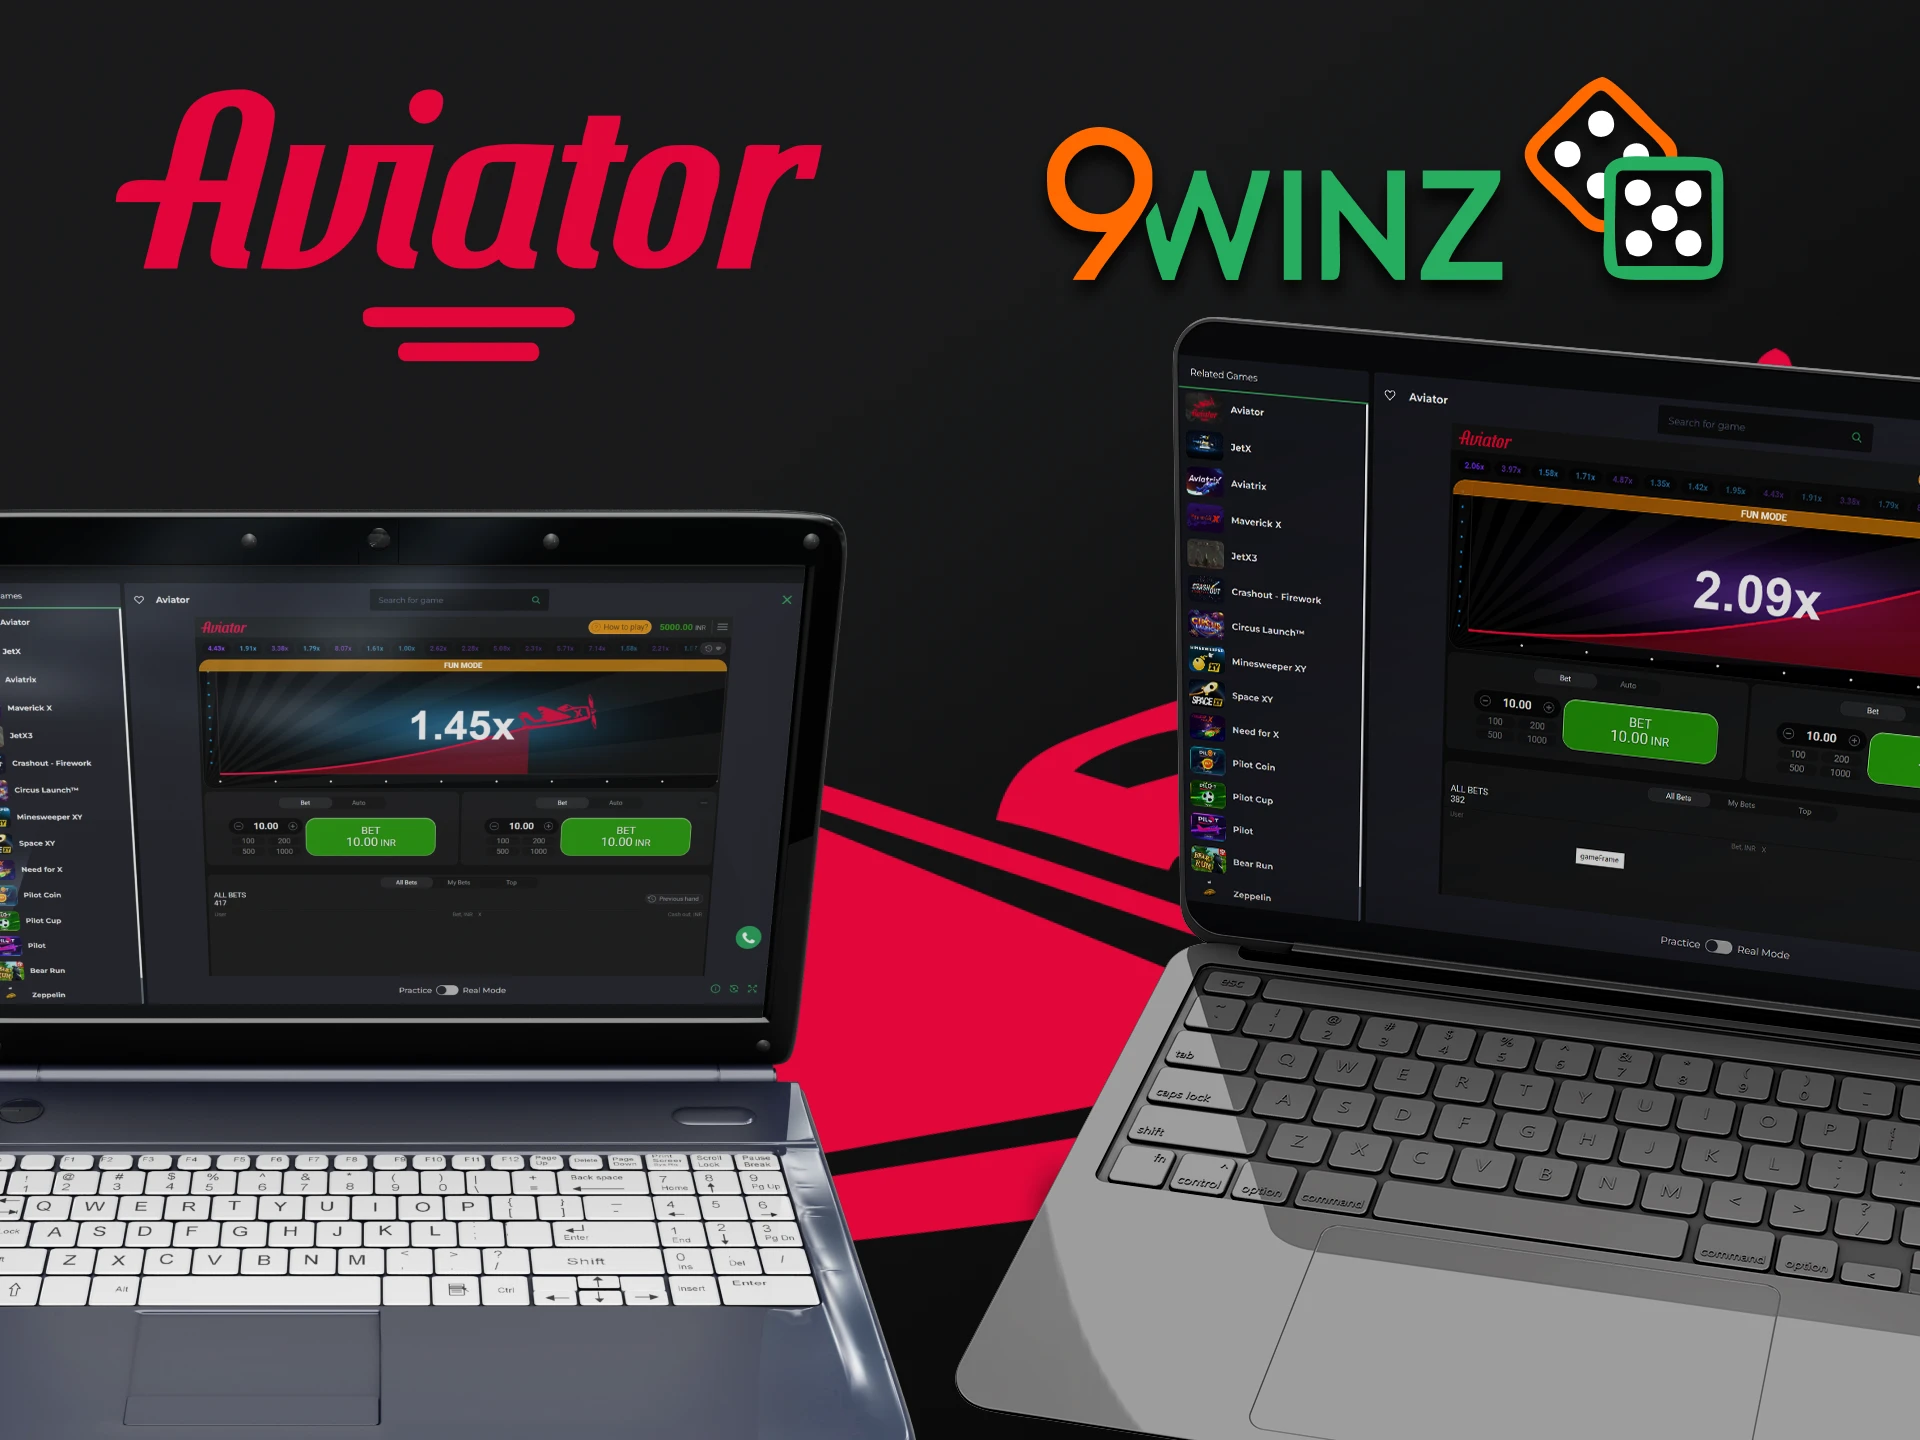 Choose your device to play Aviator on 9winz.